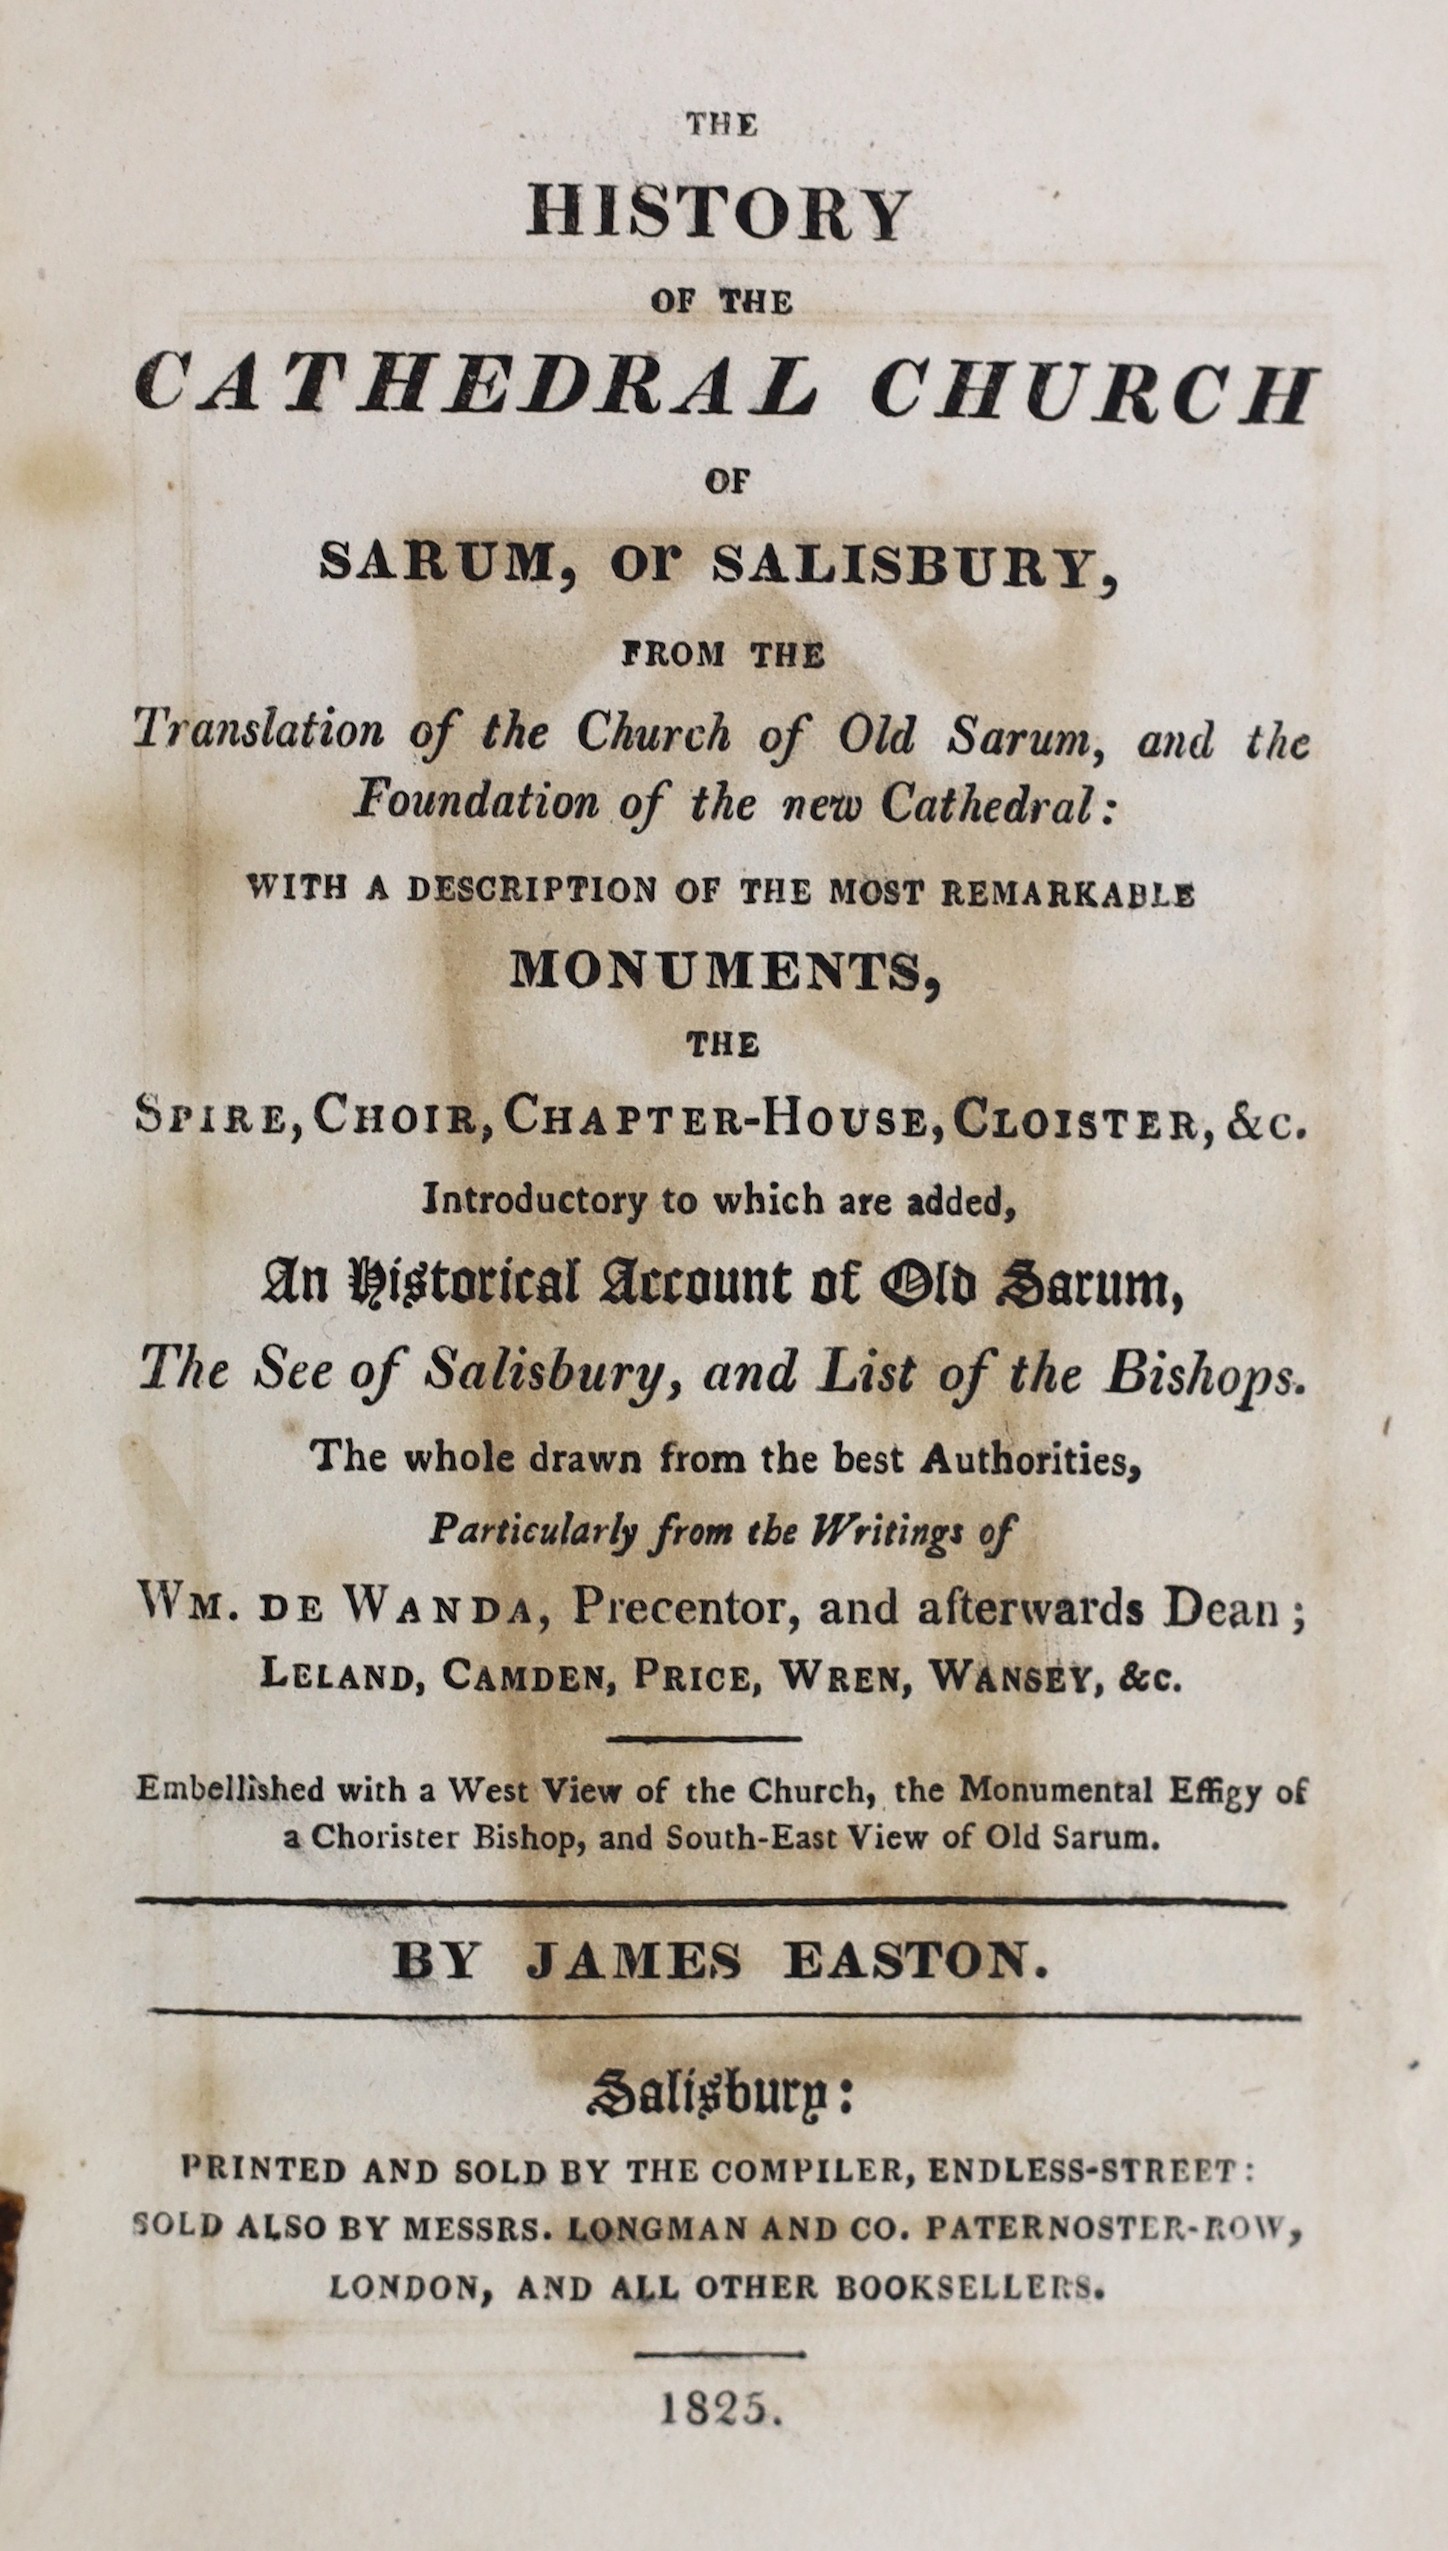 WILTS: Easton, James - The History of the Cathedral Church of Sarum, or Salisbury ... to which are added, an Historical Account of Old Sarum ... 3 plates; contemp. gilt-decorated calf, rebacked. Salisbury, 1825